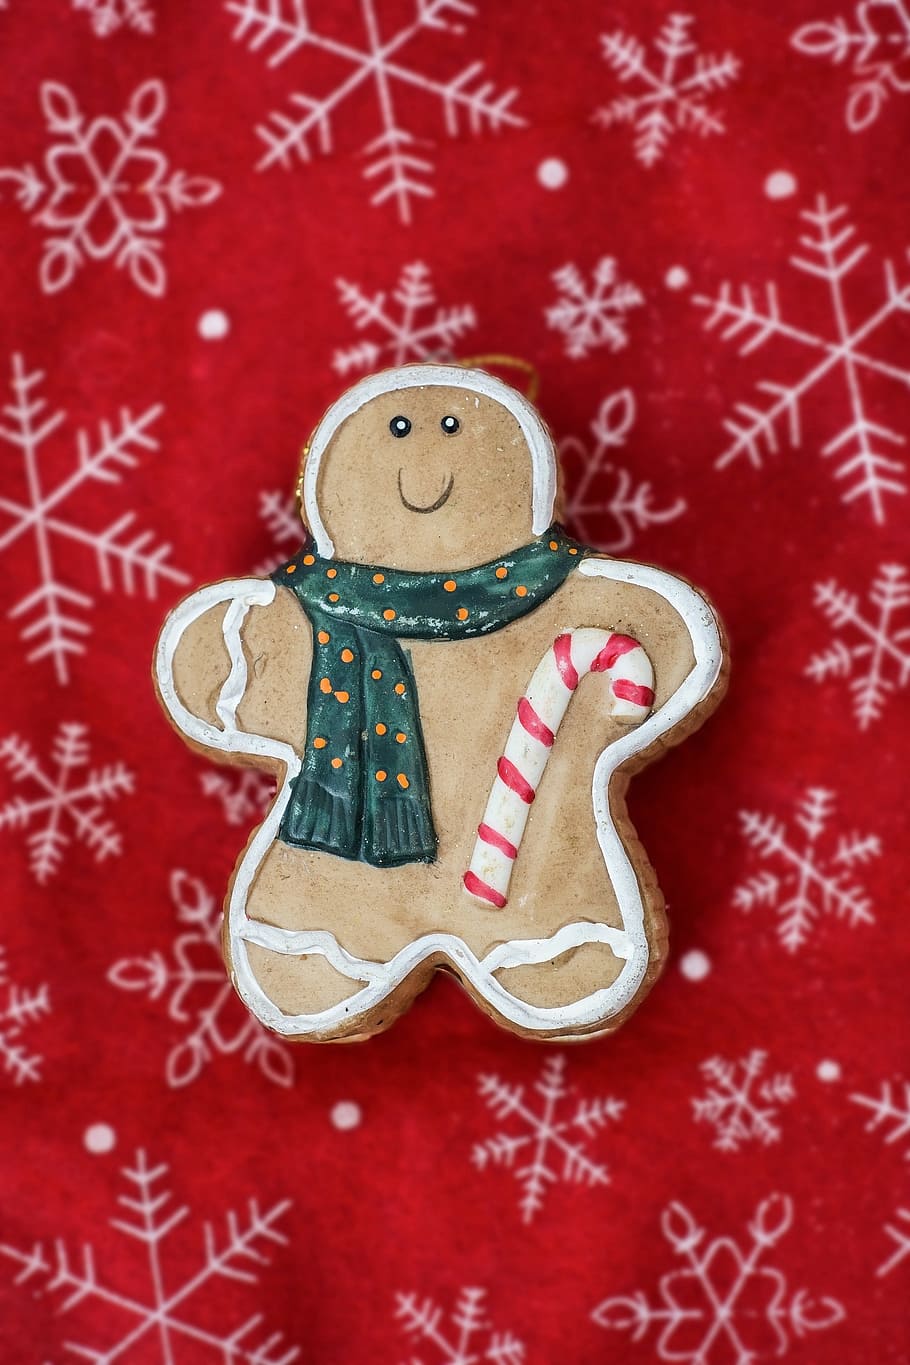 35900 Gingerbread Man Stock Photos Pictures  RoyaltyFree Images   iStock  Gingerbread man vector Gingerbread man cookie Sad gingerbread man